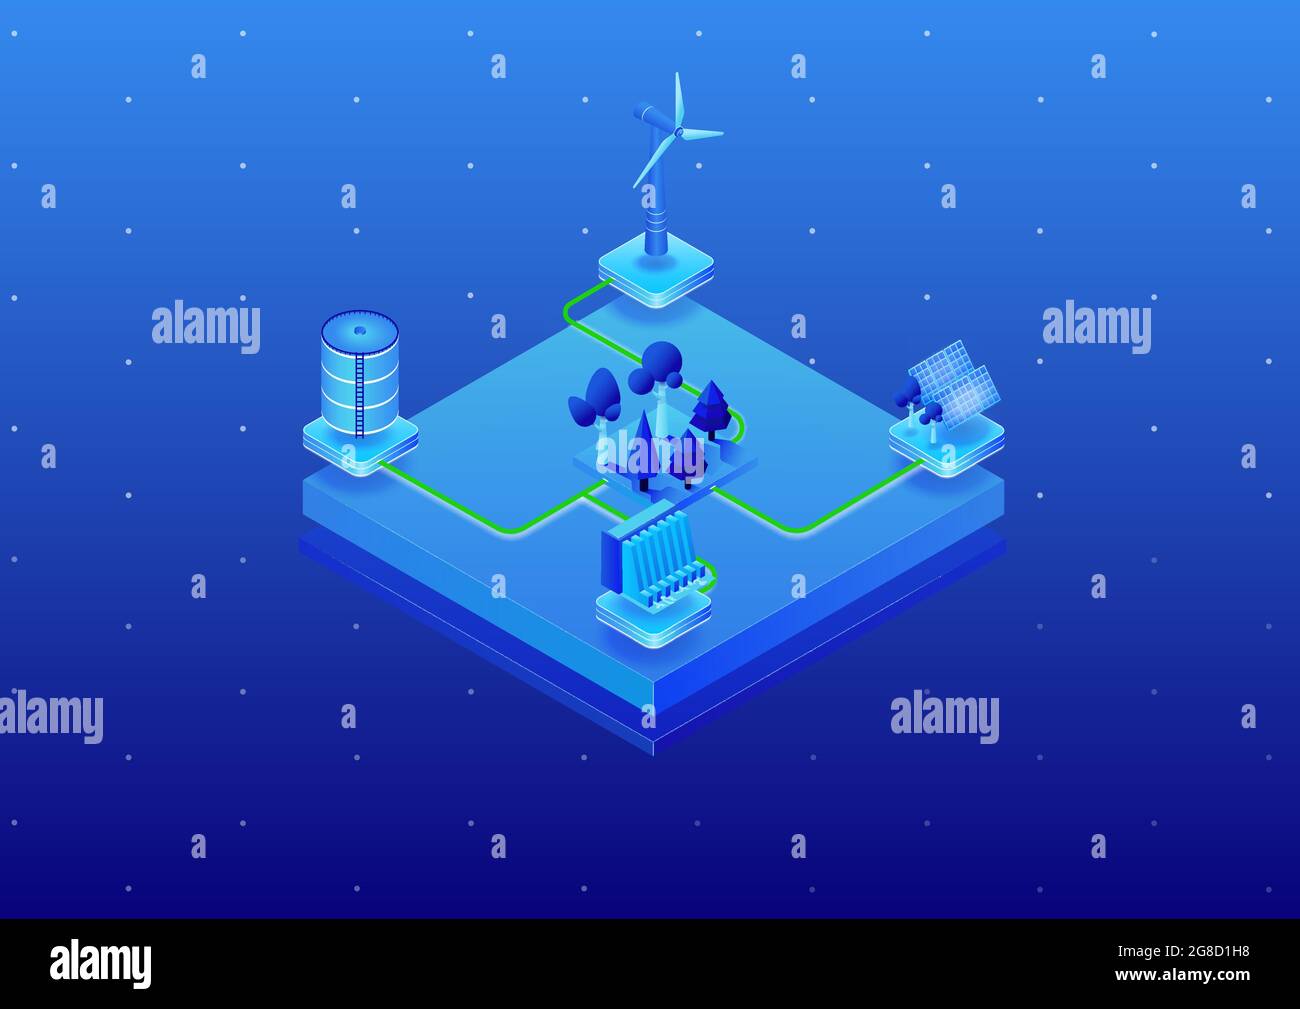 Concept of preserving nature by using renewable energy as 3D isometric vector illustration. Electricity generated by wind turbine, solar panel and wat Stock Vector